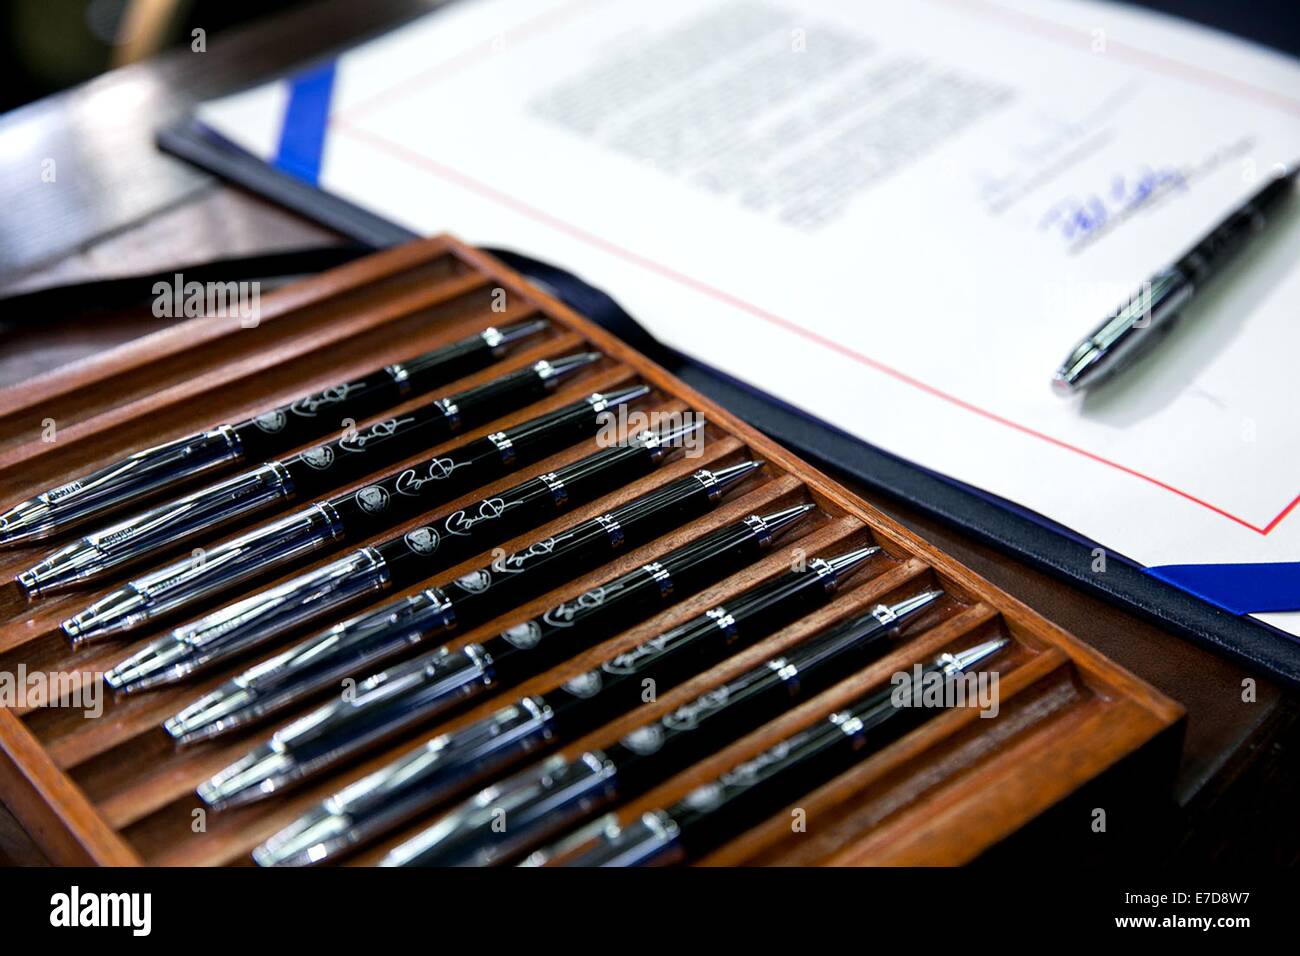 Pens to be used by U.S. President Barack Obama are set on the signing table next to the legislation prior to the signing of H.R. 803, the Workforce Innovation and Opportunity Act, in the Eisenhower Executive Office Building South Court Auditorium July 22, 2014 in Washington, DC. Stock Photo